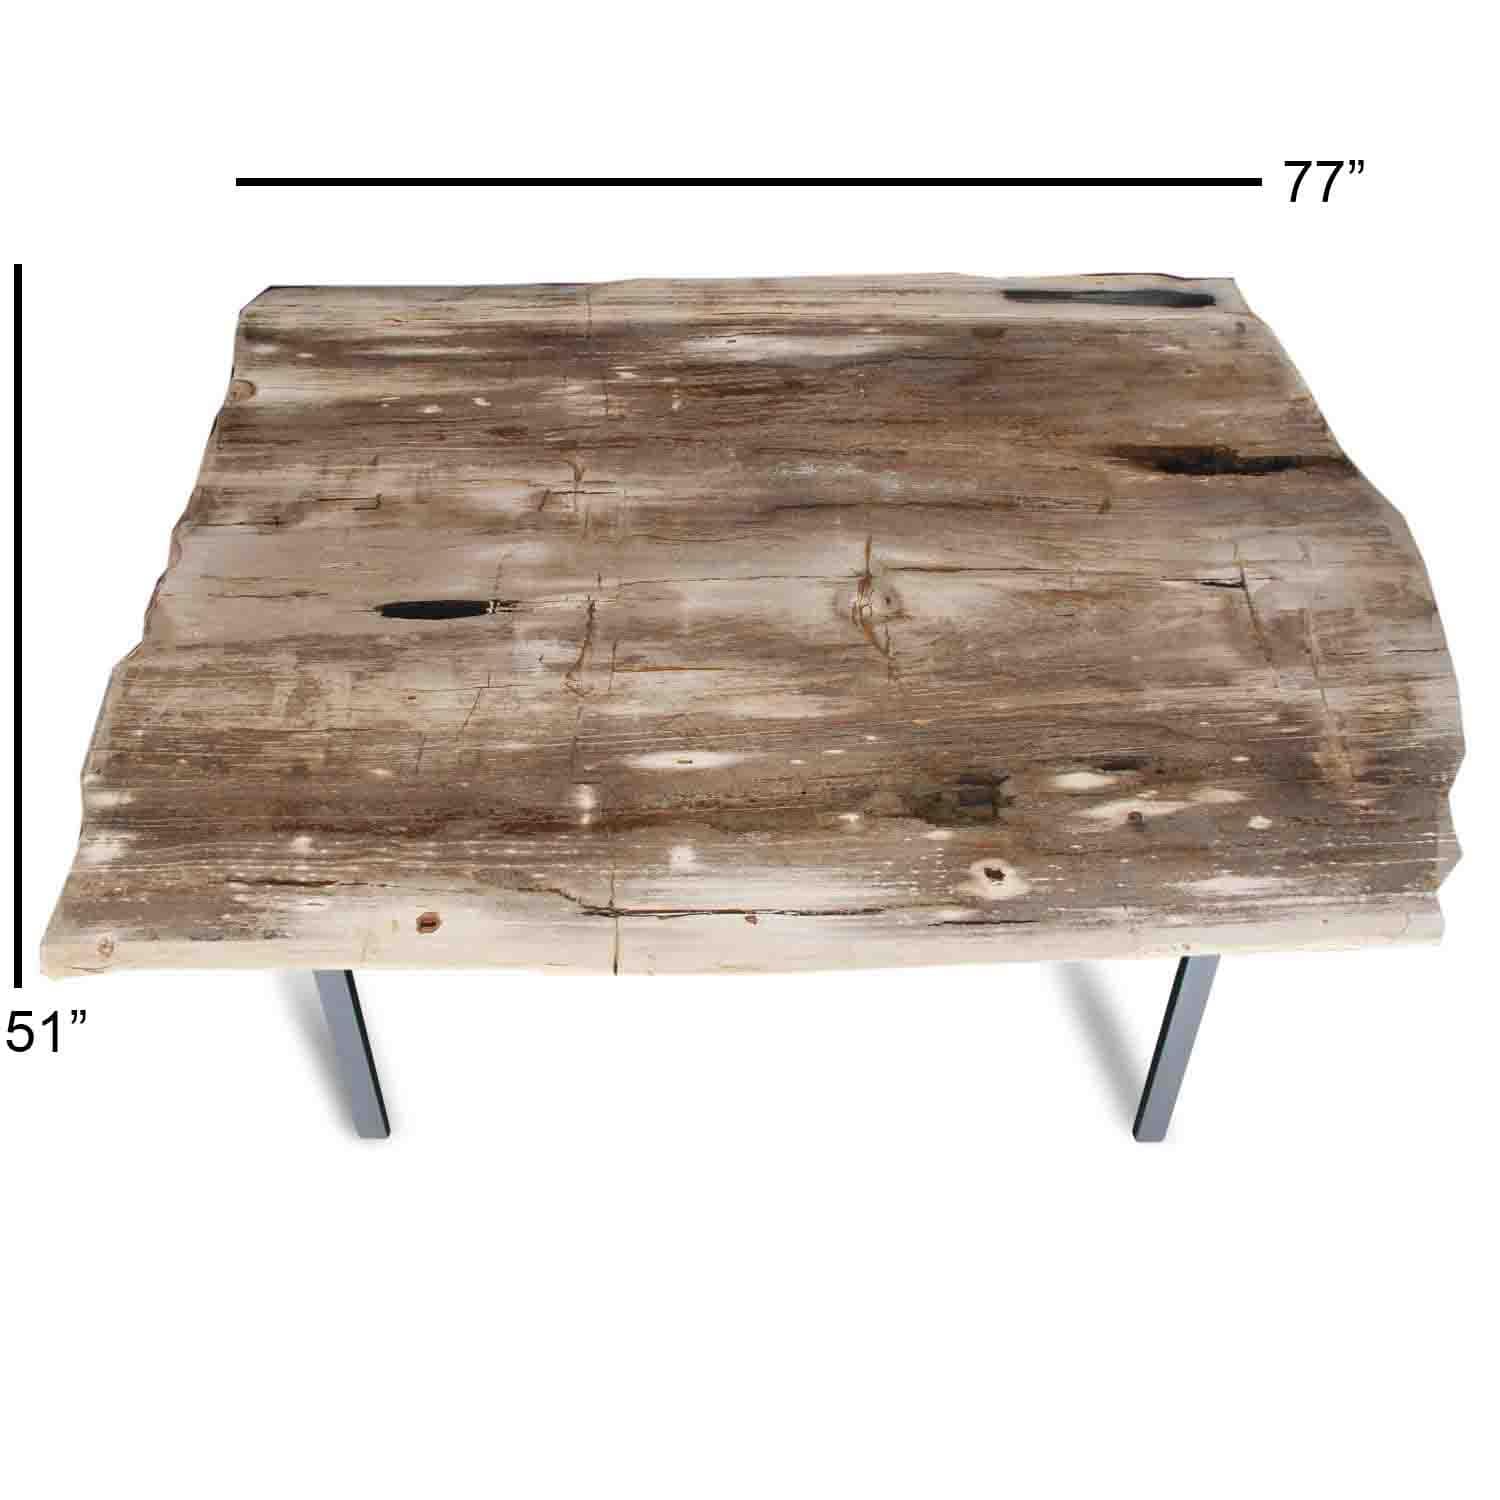 Kalifano Petrified Wood Natural Polished Petrified Wood Rectangular Table Top from Indonesia - 77" / 822 lbs PWR29800.001